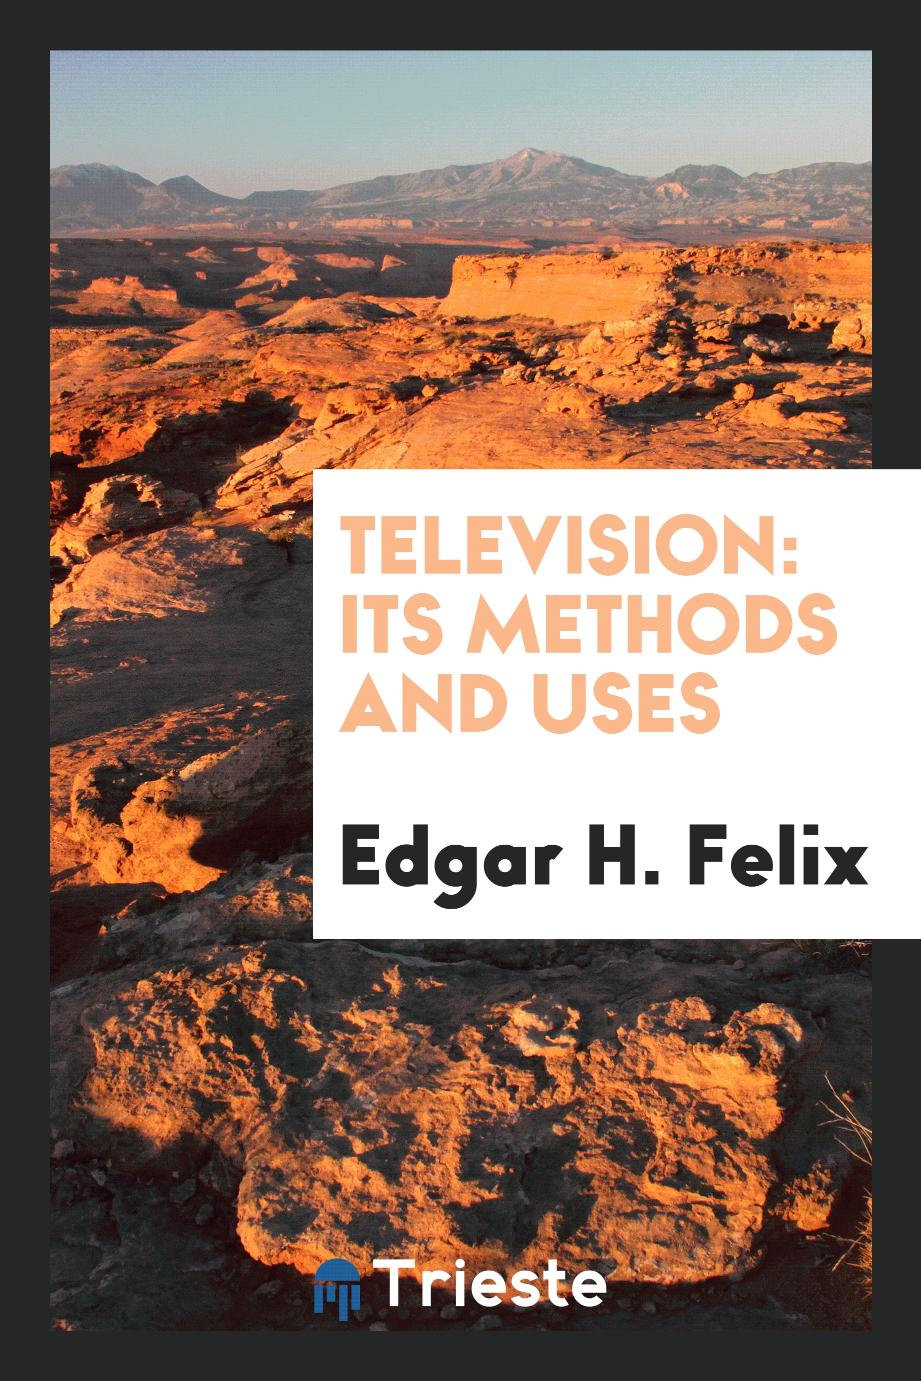 Television: its methods and uses